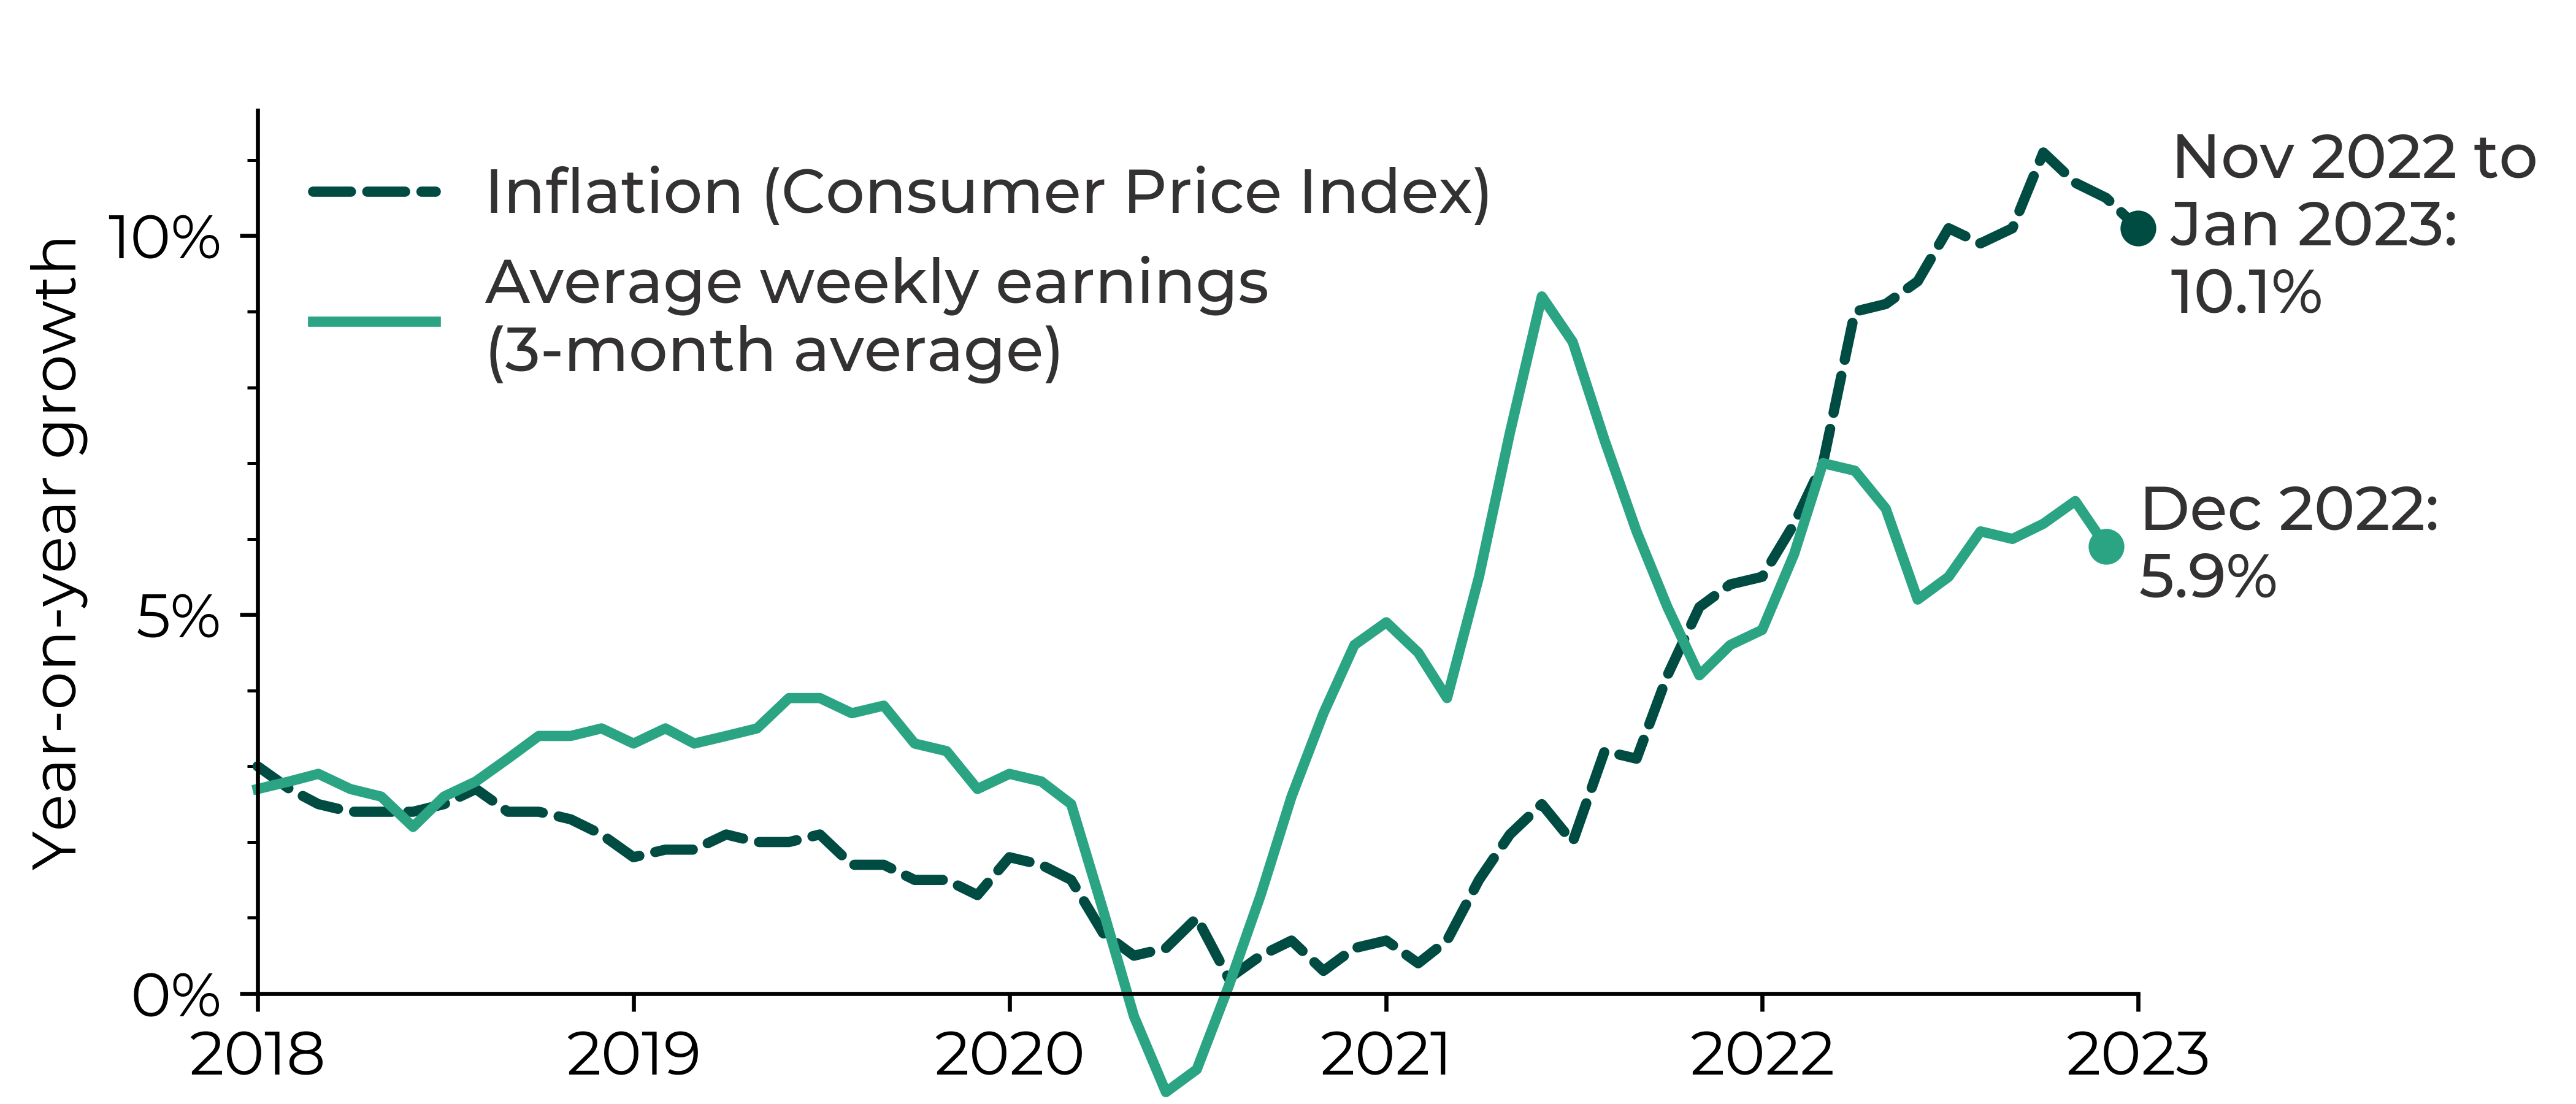 Graph showing UK inflation exceeding average weekly earnings (3-month average) in 2022. In December 2022, the average weekly earnings were 5.9% higher than for December 2021 whereas the Consumer Price Index inflation was at 10.1%.